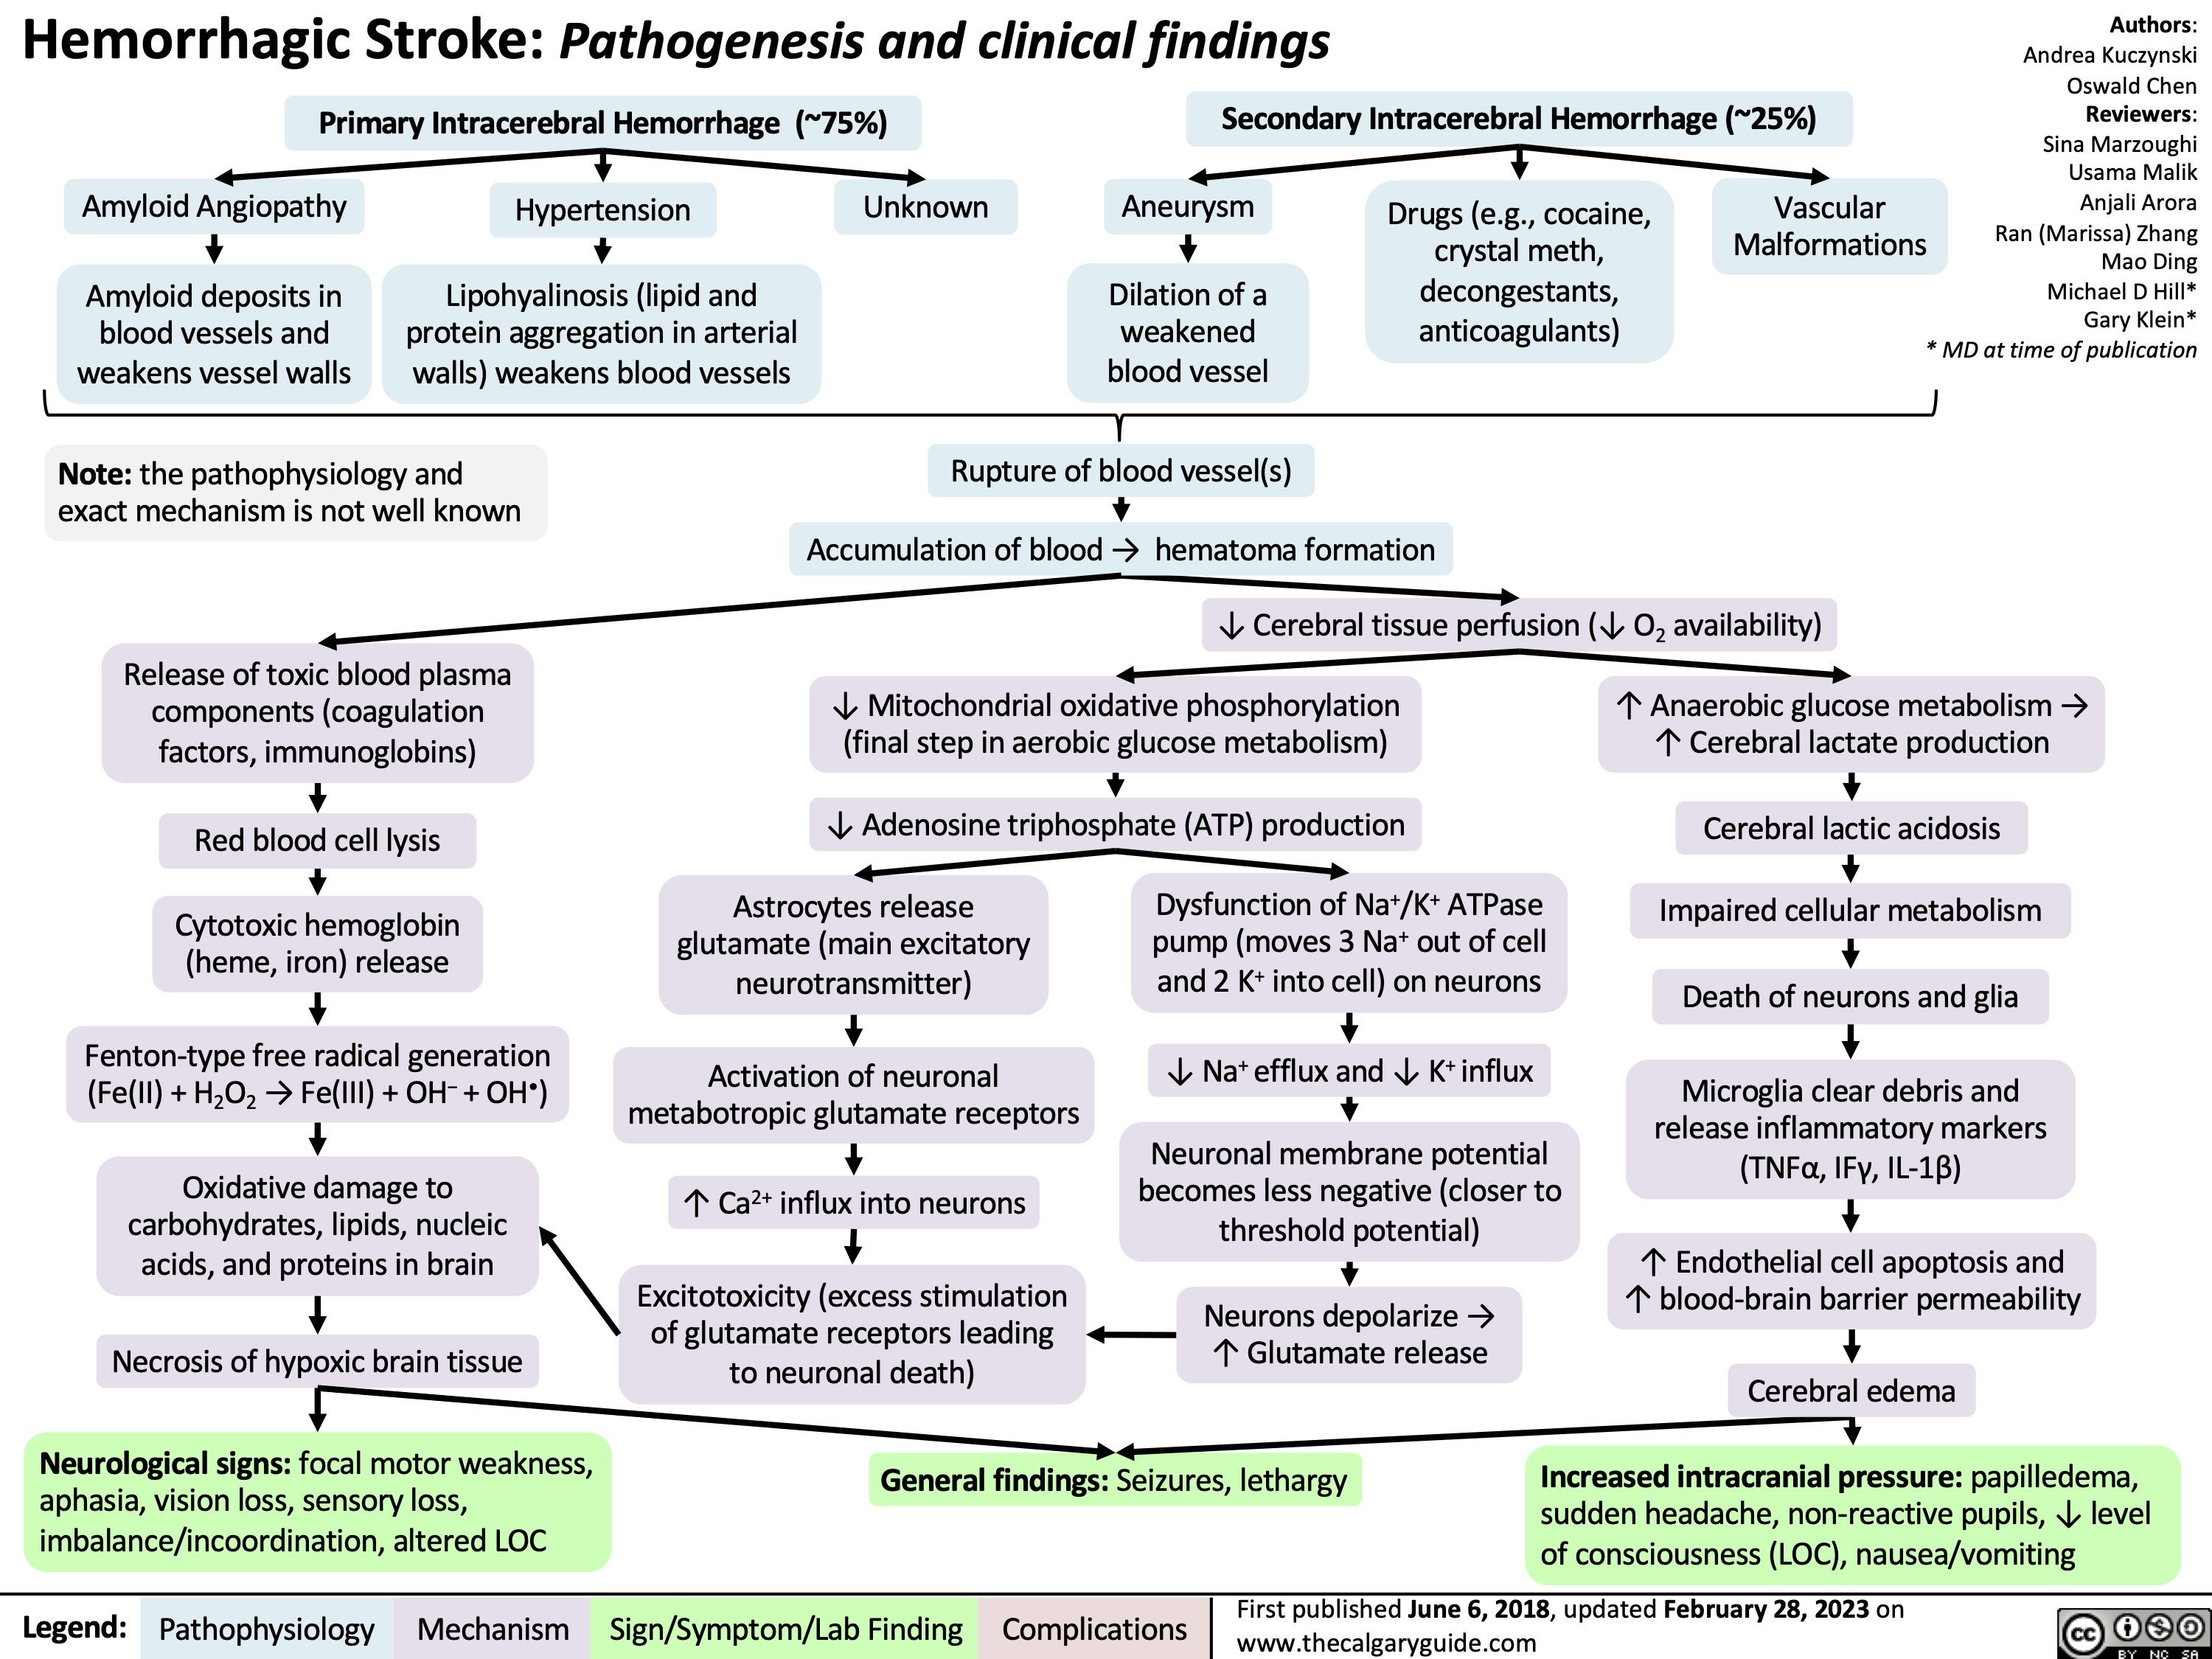 Hemorrhagic Stroke: Pathogenesis and clinical findings
Authors: Andrea Kuczynski Oswald Chen Reviewers: Sina Marzoughi Usama Malik Anjali Arora Ran (Marissa) Zhang Mao Ding Michael D Hill* Gary Klein* * MD at time of publication
  Primary Intracerebral Hemorrhage (~75%)
Secondary Intracerebral Hemorrhage (~25%)
        Amyloid Angiopathy
Amyloid deposits in blood vessels and weakens vessel walls
Hypertension
Lipohyalinosis (lipid and protein aggregation in arterial walls) weakens blood vessels
Unknown
Aneurysm
Dilation of a weakened blood vessel
Drugs (e.g., cocaine, crystal meth, decongestants, anticoagulants)
Vascular Malformations
      Note: the pathophysiology and exact mechanism is not well known
Release of toxic blood plasma components (coagulation factors, immunoglobins)
Red blood cell lysis
Cytotoxic hemoglobin (heme, iron) release
Fenton-type free radical generation (Fe(II) + H2O2 → Fe(III) + OH− + OH•)
Oxidative damage to carbohydrates, lipids, nucleic acids, and proteins in brain
Necrosis of hypoxic brain tissue
Neurological signs: focal motor weakness, aphasia, vision loss, sensory loss, imbalance/incoordination, altered LOC
Rupture of blood vessel(s) Accumulation of blood → hematoma formation
    ↓ Cerebral tissue perfusion (↓ O2 availability)
     ↓ Mitochondrial oxidative phosphorylation (final step in aerobic glucose metabolism)
↓ Adenosine triphosphate (ATP) production
↑ Anaerobic glucose metabolism → ↑ Cerebral lactate production
Cerebral lactic acidosis Impaired cellular metabolism Death of neurons and glia
Microglia clear debris and release inflammatory markers (TNFα, IFγ, IL-1β)
↑ Endothelial cell apoptosis and ↑ blood-brain barrier permeability
Cerebral edema
Increased intracranial pressure: papilledema, sudden headache, non-reactive pupils, ↓ level of consciousness (LOC), nausea/vomiting
        Astrocytes release glutamate (main excitatory neurotransmitter)
Activation of neuronal metabotropic glutamate receptors
↑ Ca2+ influx into neurons
Excitotoxicity (excess stimulation of glutamate receptors leading to neuronal death)
Dysfunction of Na+/K+ ATPase pump (moves 3 Na+ out of cell and 2 K+ into cell) on neurons
↓ Na+ efflux and ↓ K+ influx
Neuronal membrane potential becomes less negative (closer to threshold potential)
Neurons depolarize → ↑ Glutamate release
                    General findings: Seizures, lethargy
 Legend:
 Pathophysiology
 Mechanism
Sign/Symptom/Lab Finding
 Complications
First published June 6, 2018, updated February 28, 2023 on www.thecalgaryguide.com
   